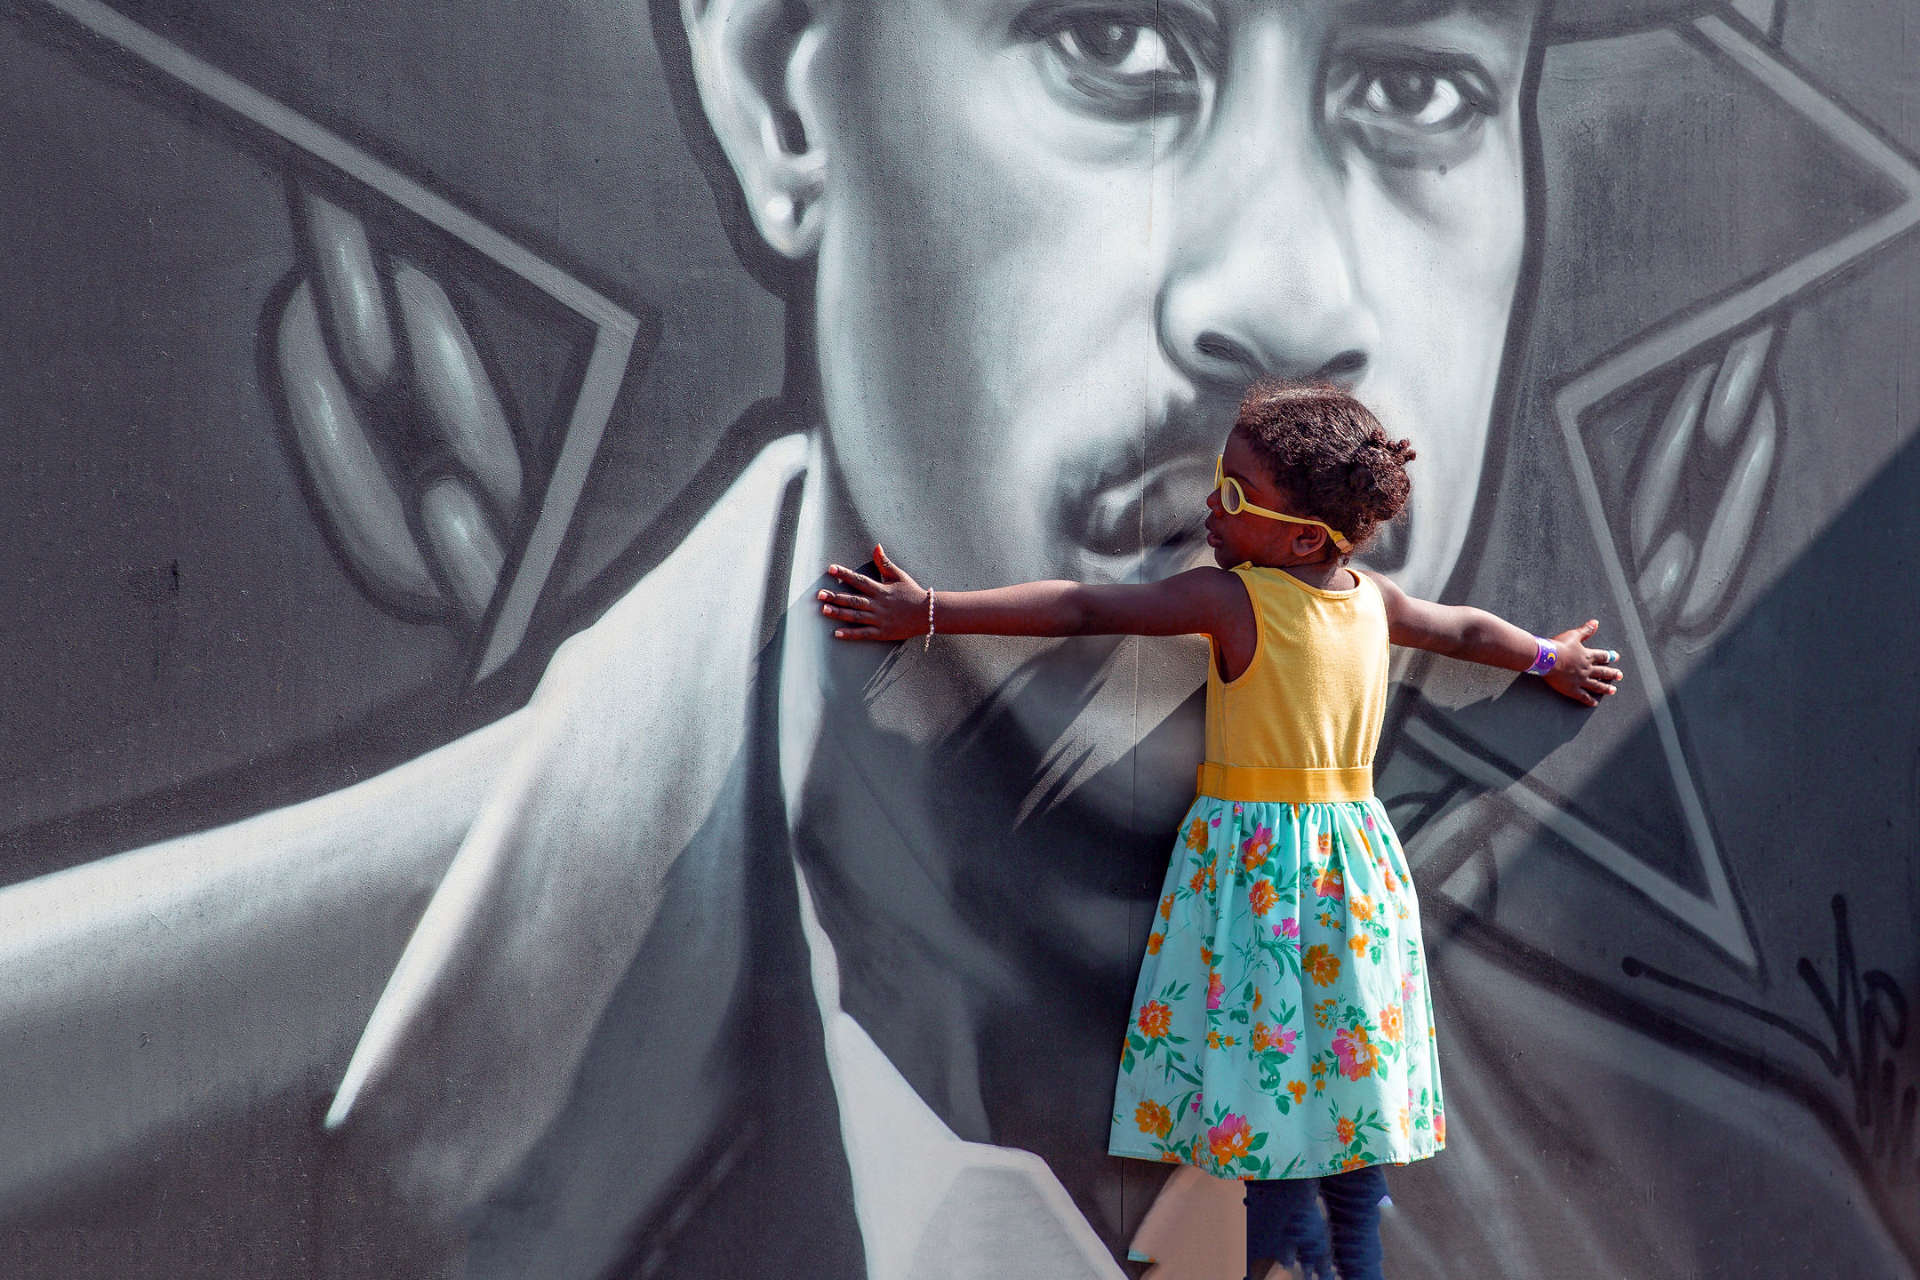 photo of a black girl in yellow glasses and a yellow dress holding her arms open to embrace a black and white painted mural depicting a black man's face